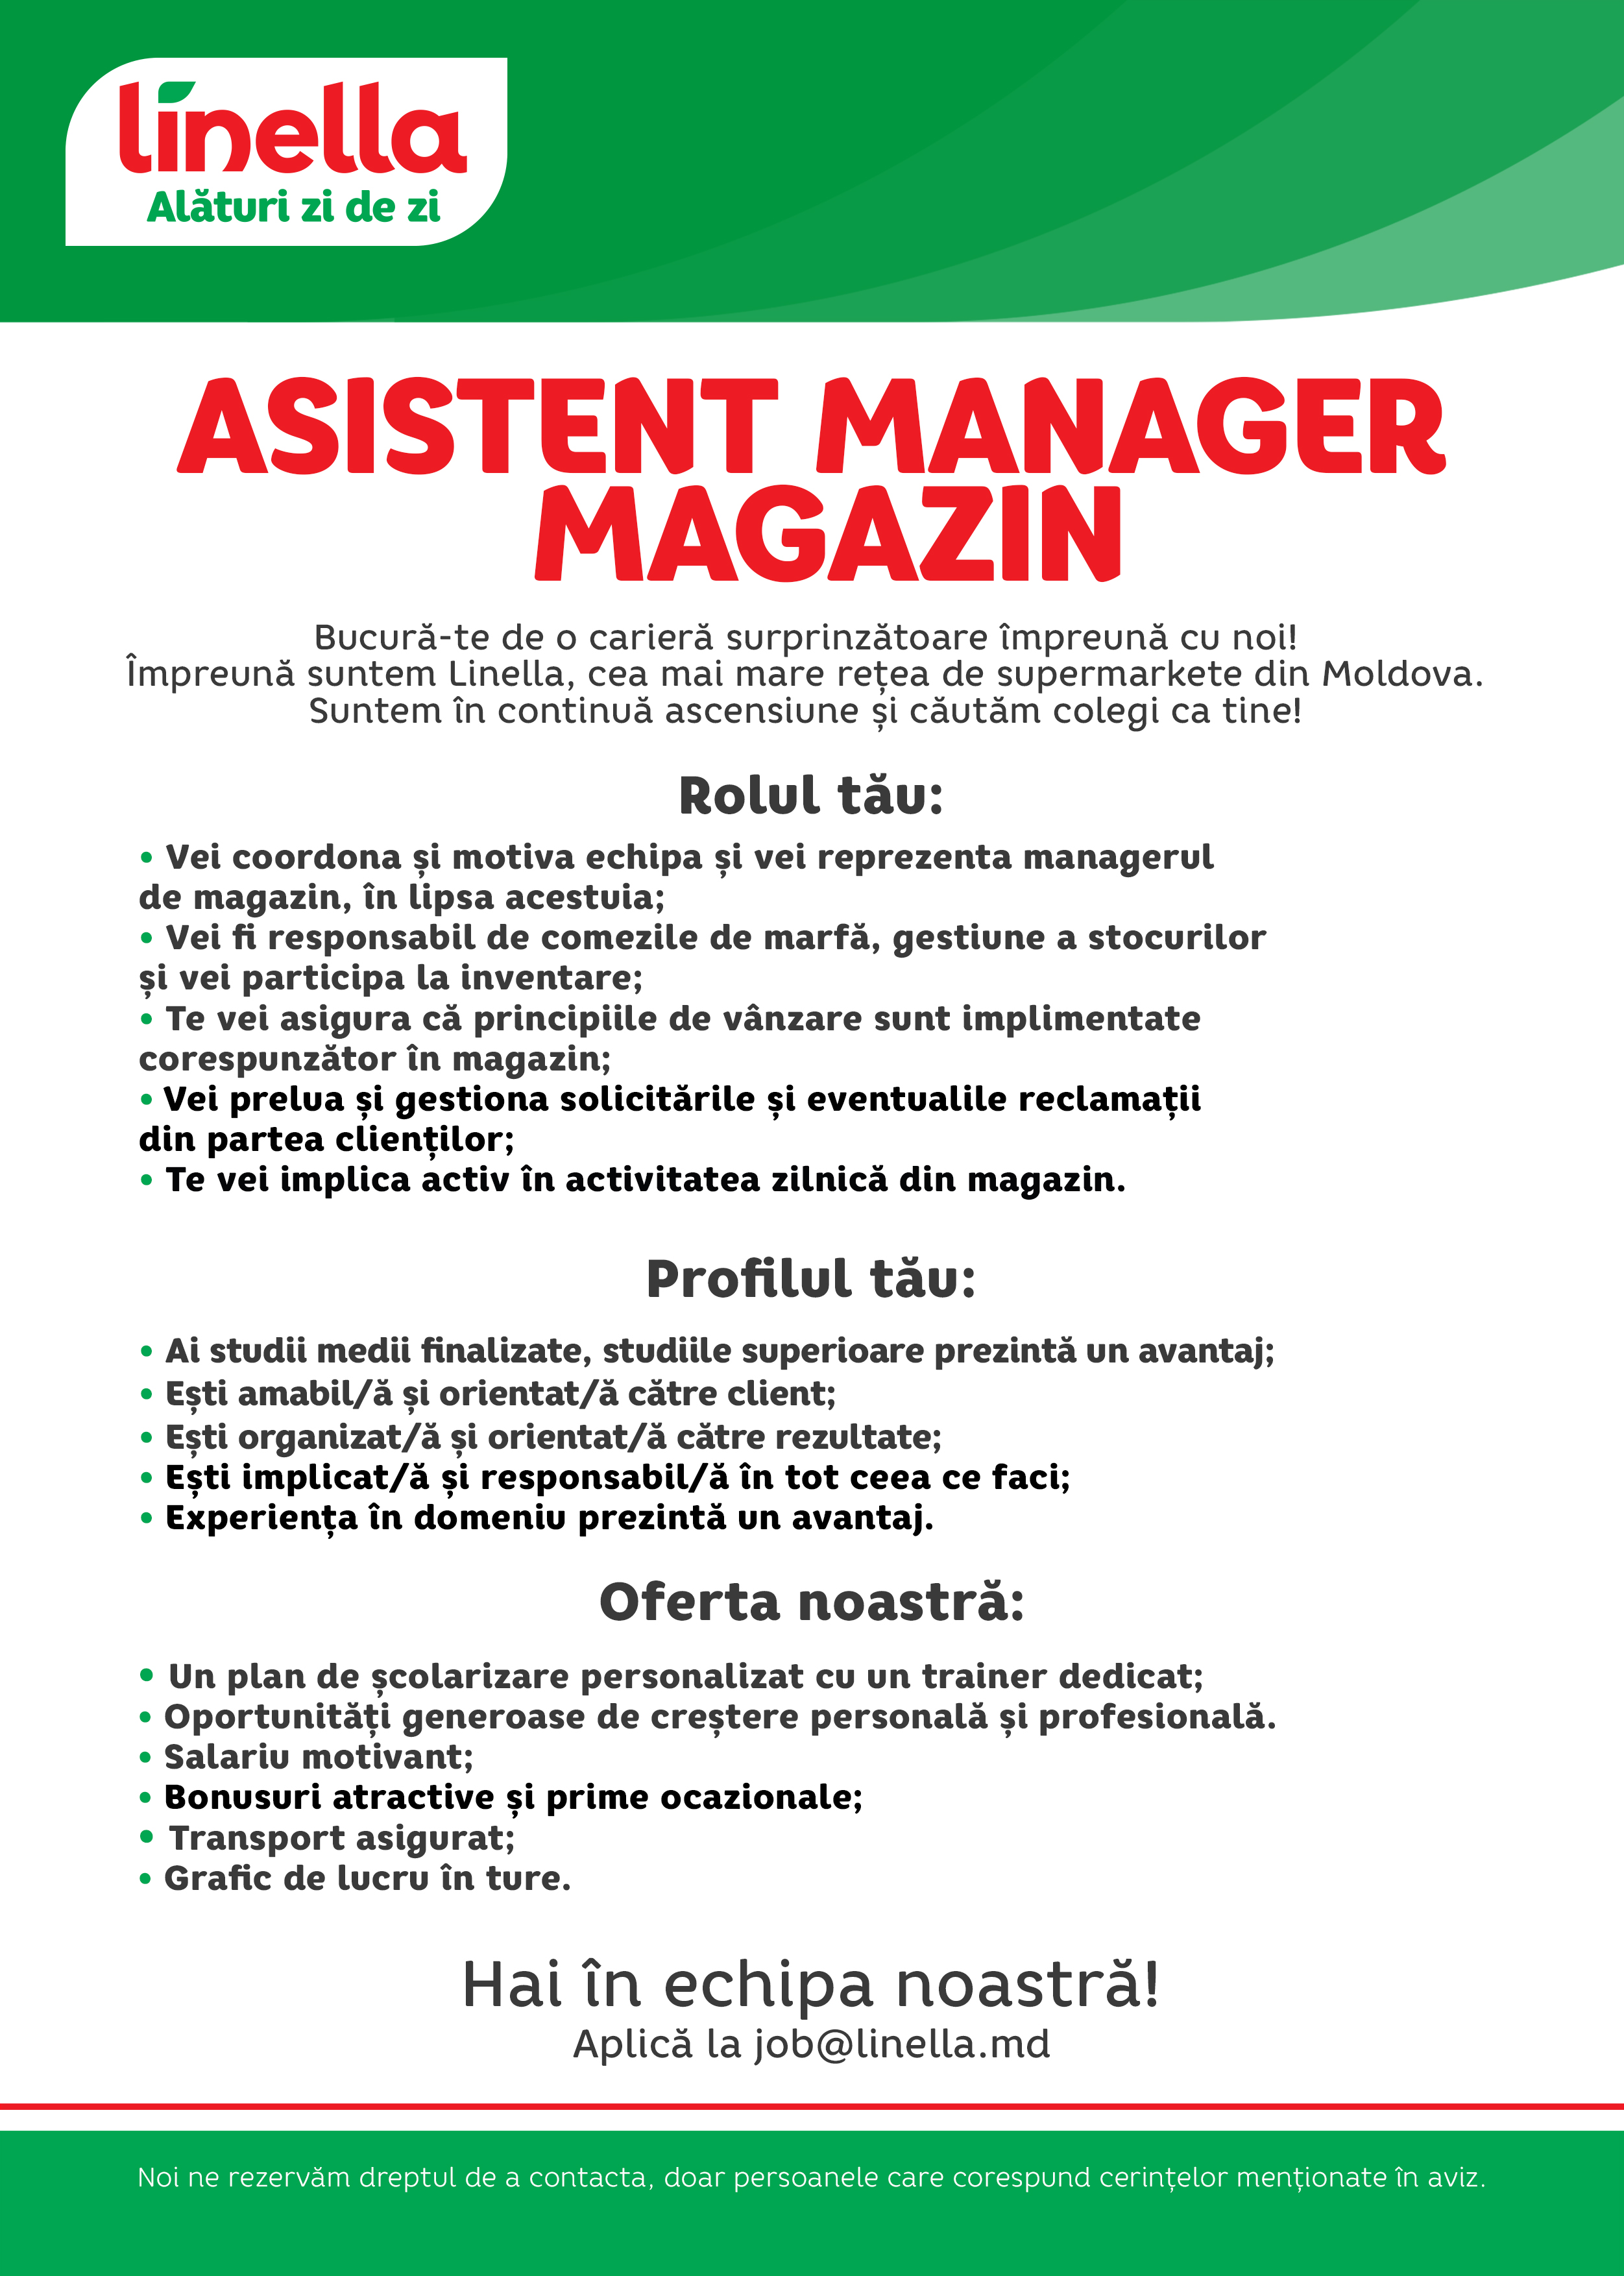 Asistent manager magazin